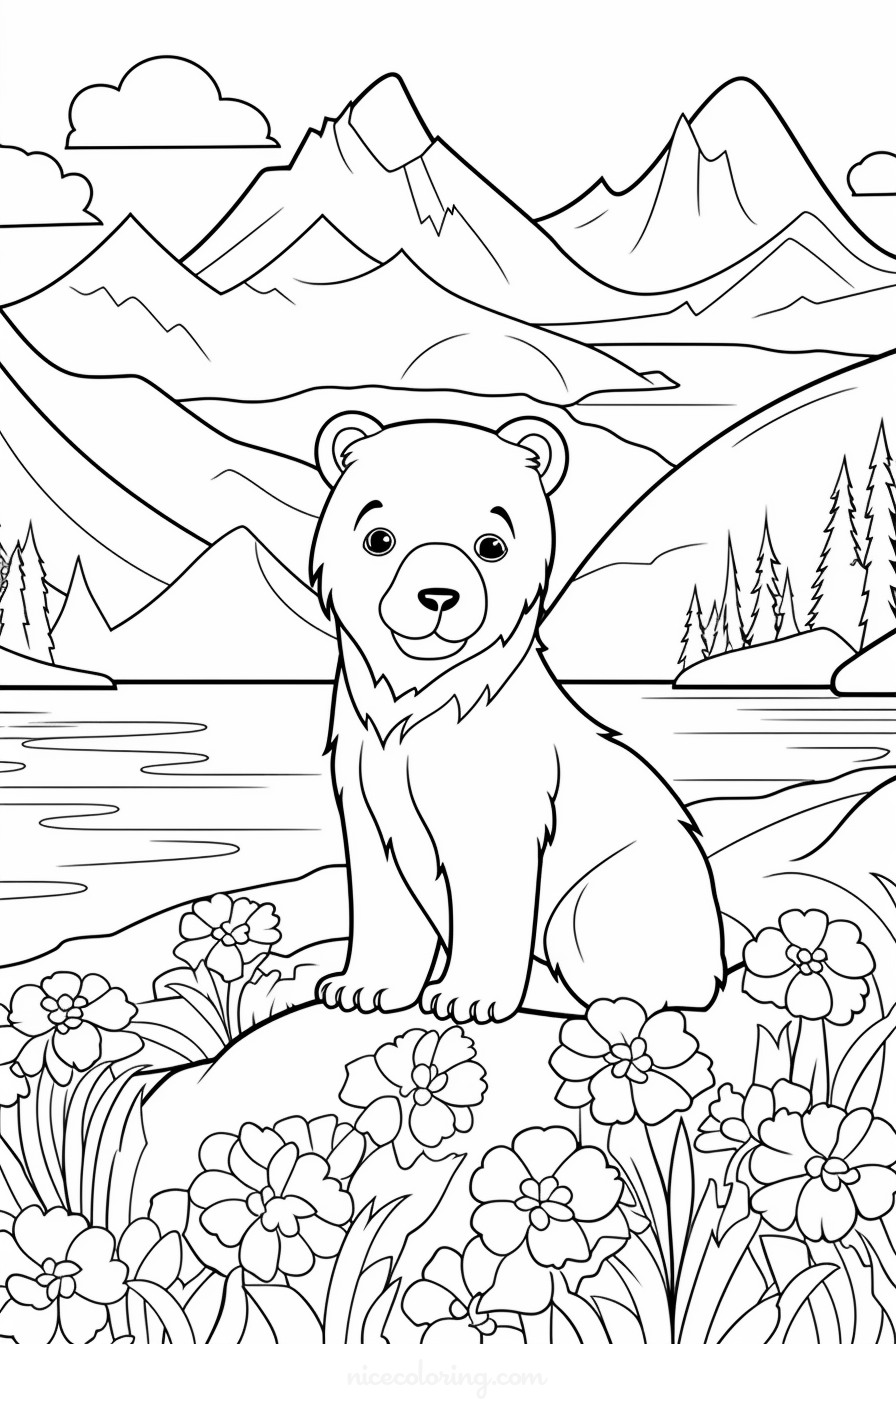 Bear playing in the forest coloring page